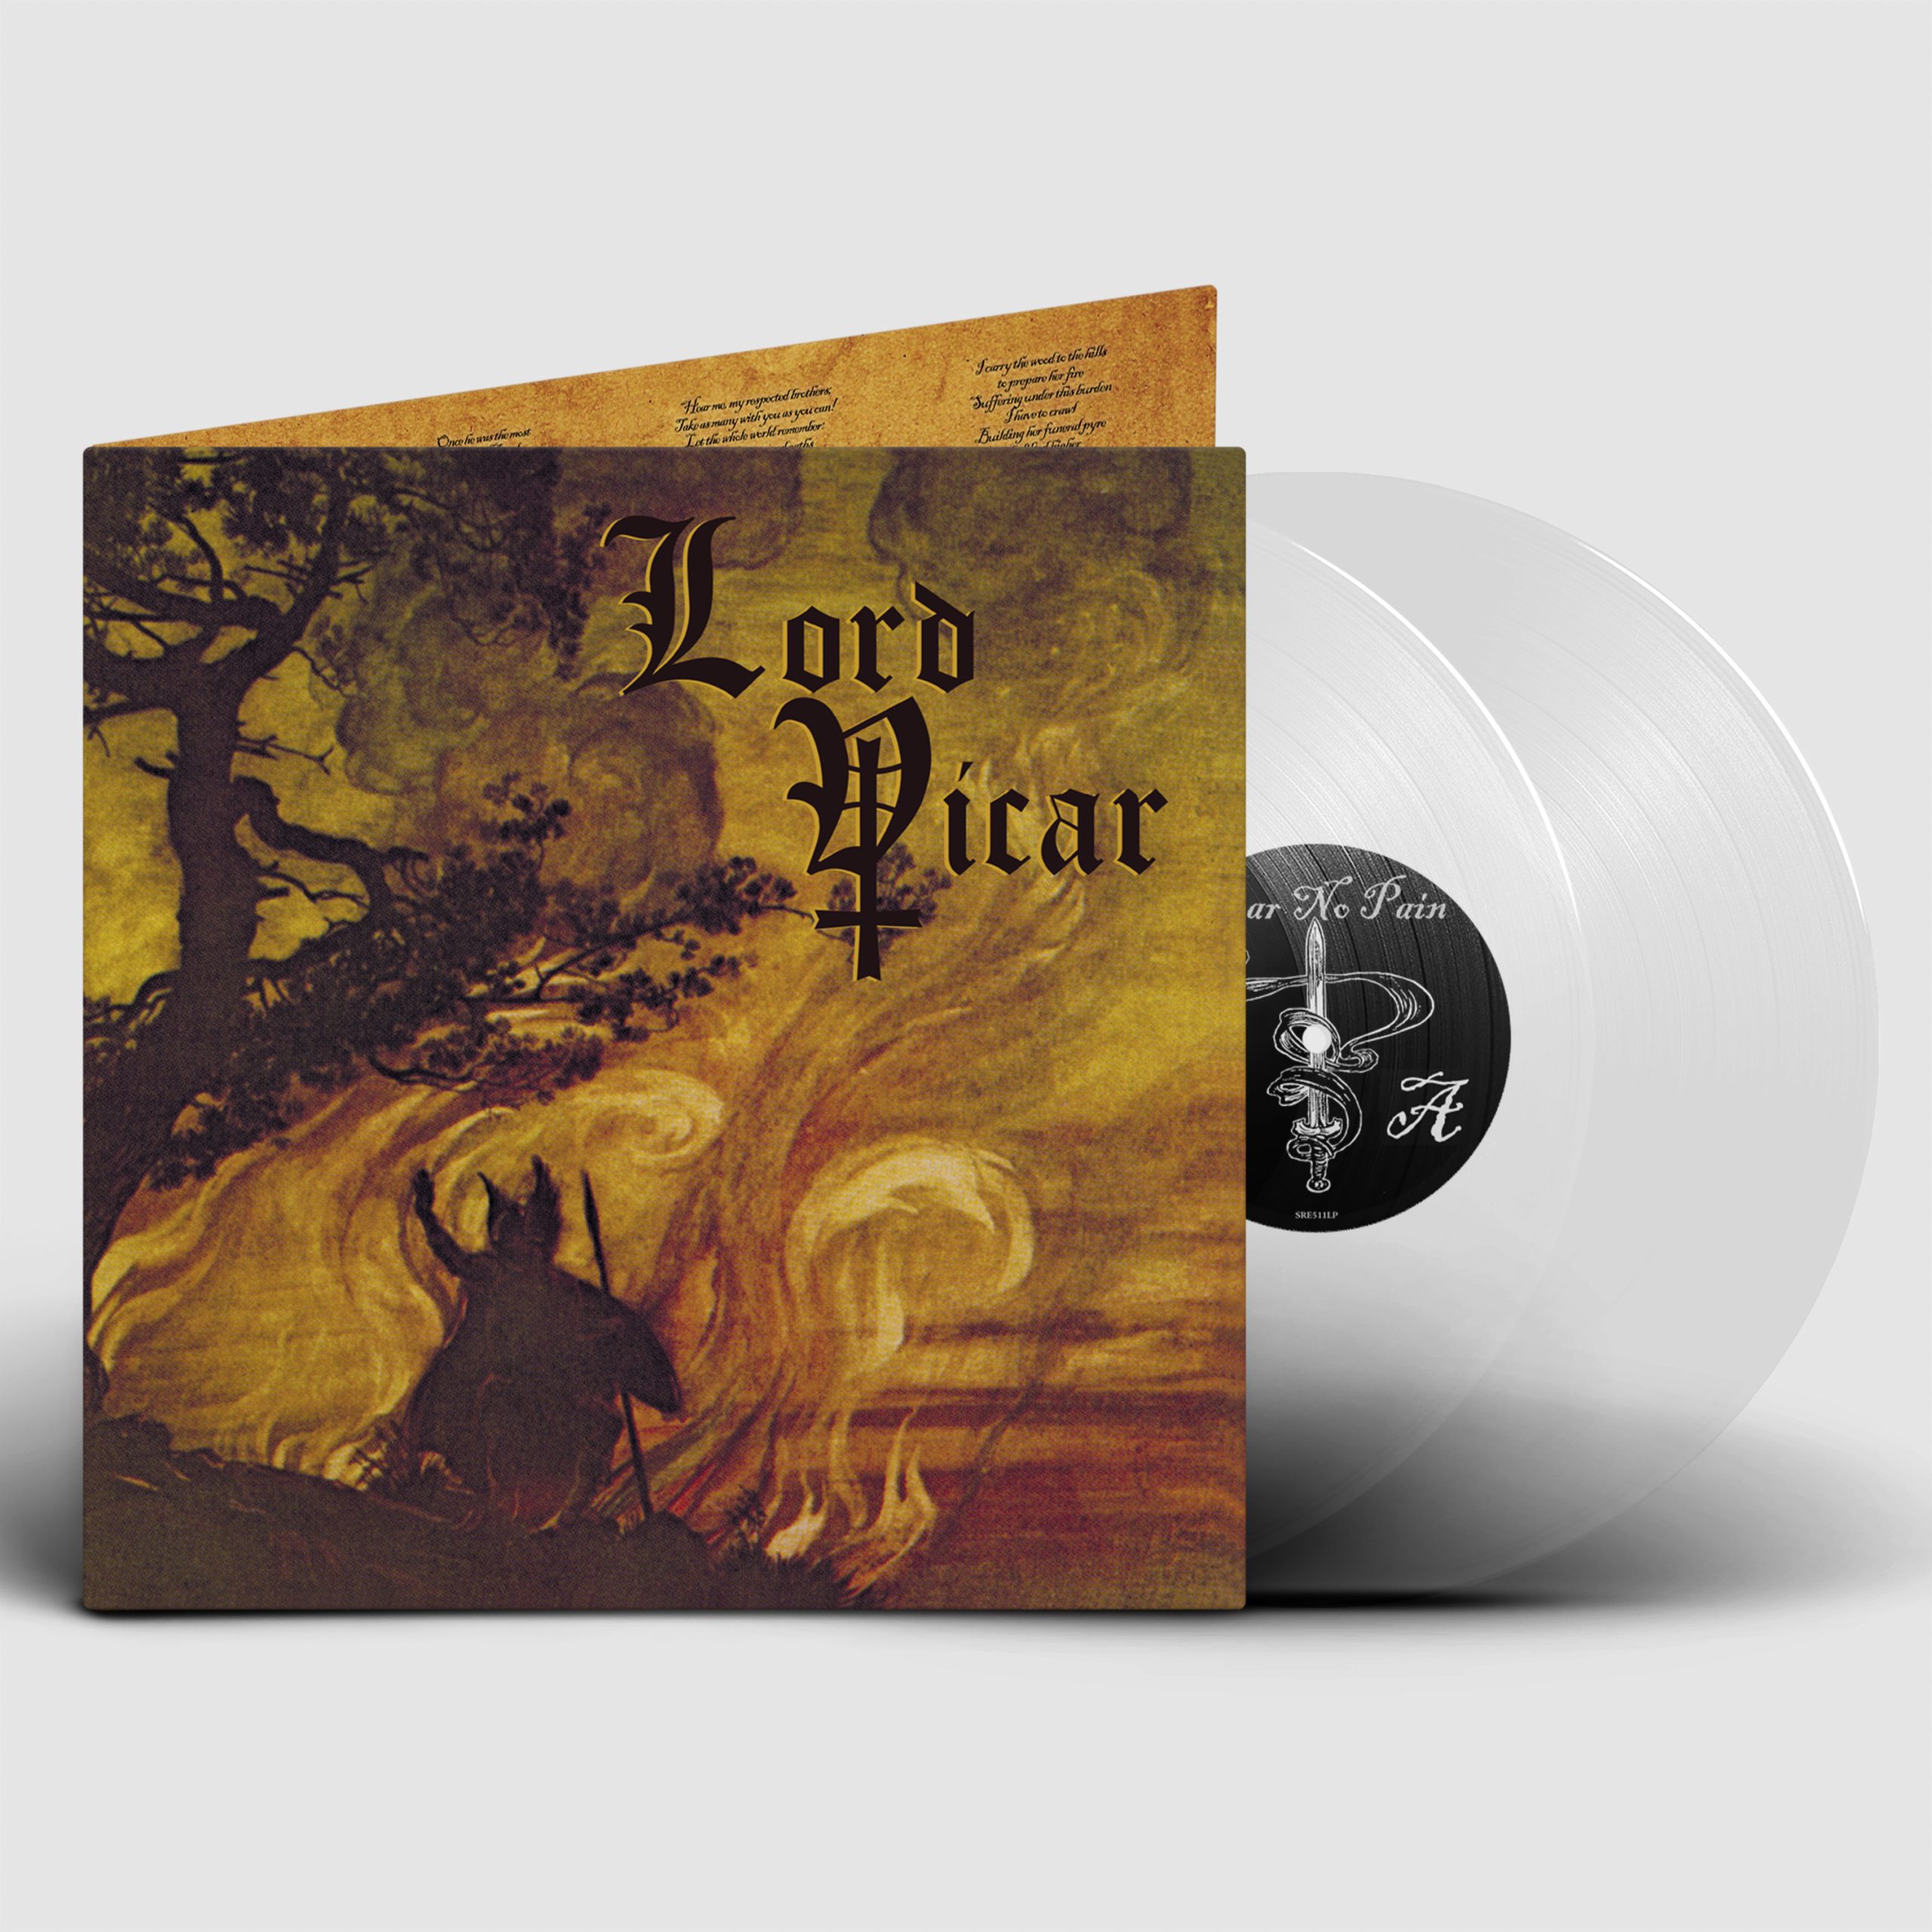 Lord Vicar – Fear No Pain col.2xLP (Svart) Up the hammers, down the nails! Originally released in 2008, this classic doom metal debut album of Lord Vicar features powerful and mournful songs about survival, regret, love, and sacrificial duty. The unmistakable melancholy of this band is underlined by the acoustic passages of ’The Funeral Pyre’ that enhance the groovy and crushing riffs that otherwise alternate throughout the album. This music must have been uplifted from some kind of personal hell, but there is much pleasure in the way it was delivered.